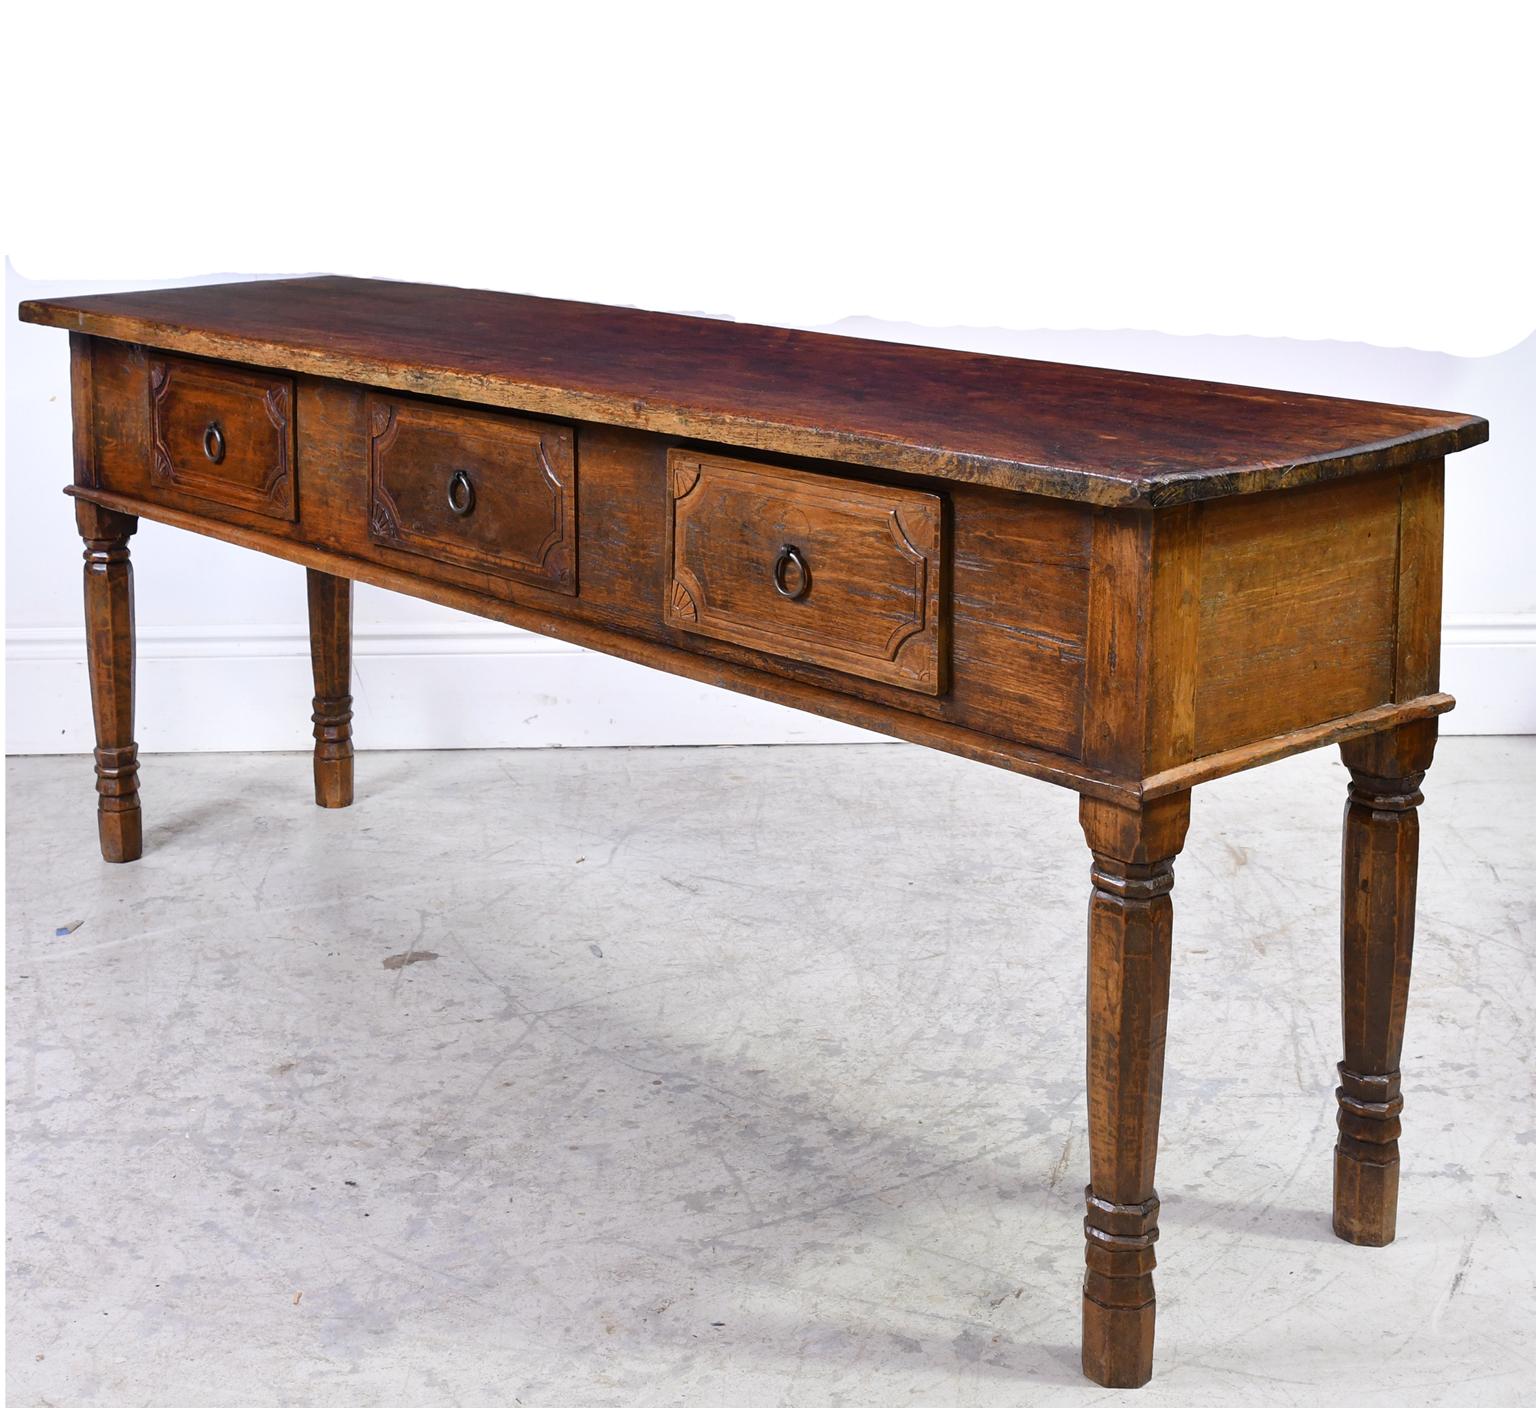 From the East Indies, a farmhouse table in teak wood with plank-top, turned legs and offering three drawers with carved fronts and original ring pulls. Indonesia, circa mid-1800s.
Measurements: 74 1/2